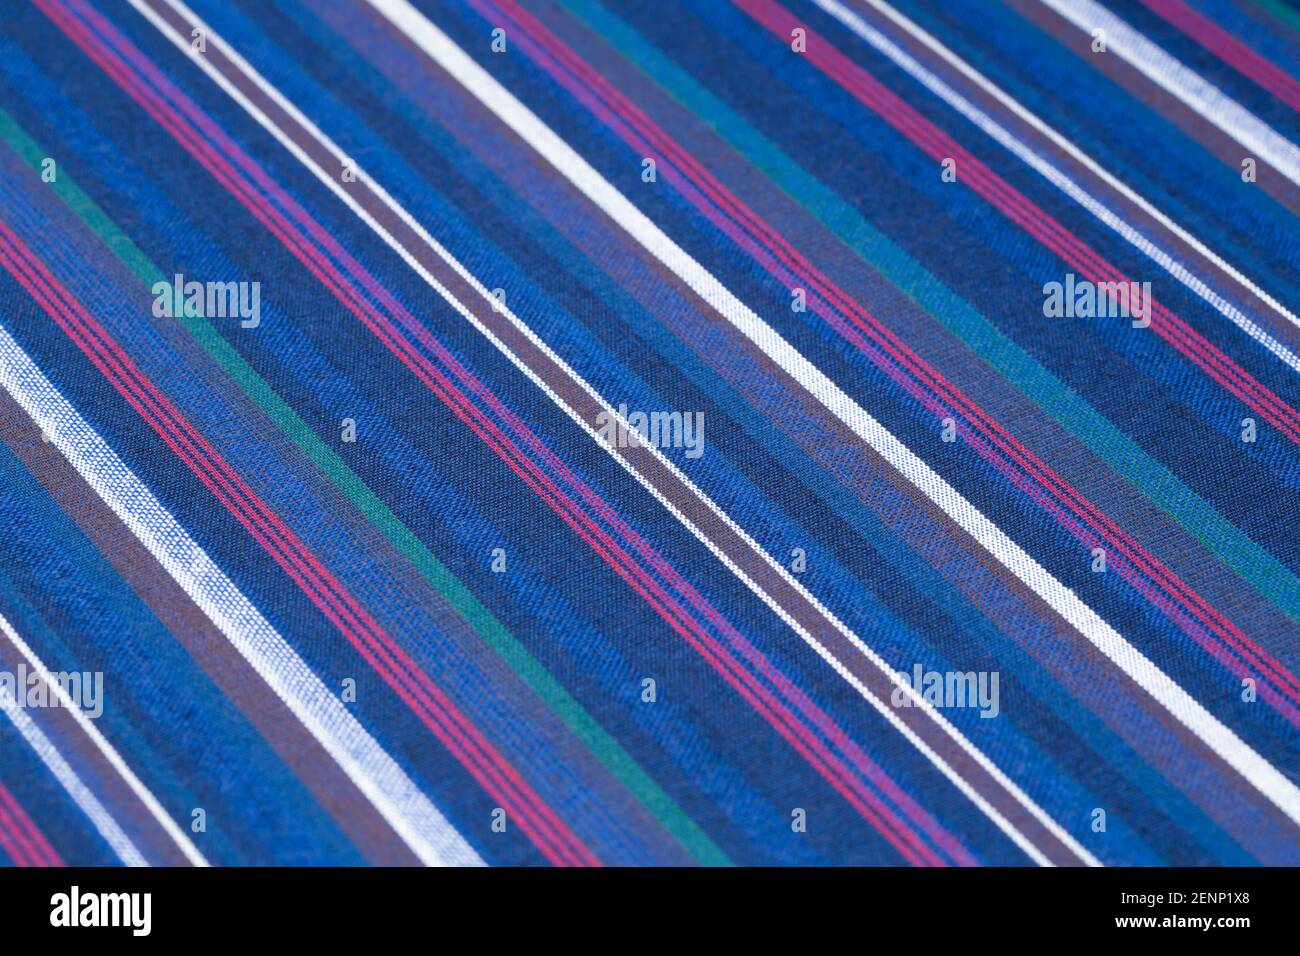 Colorful fabric texture with pattern as a background. Stock Photo